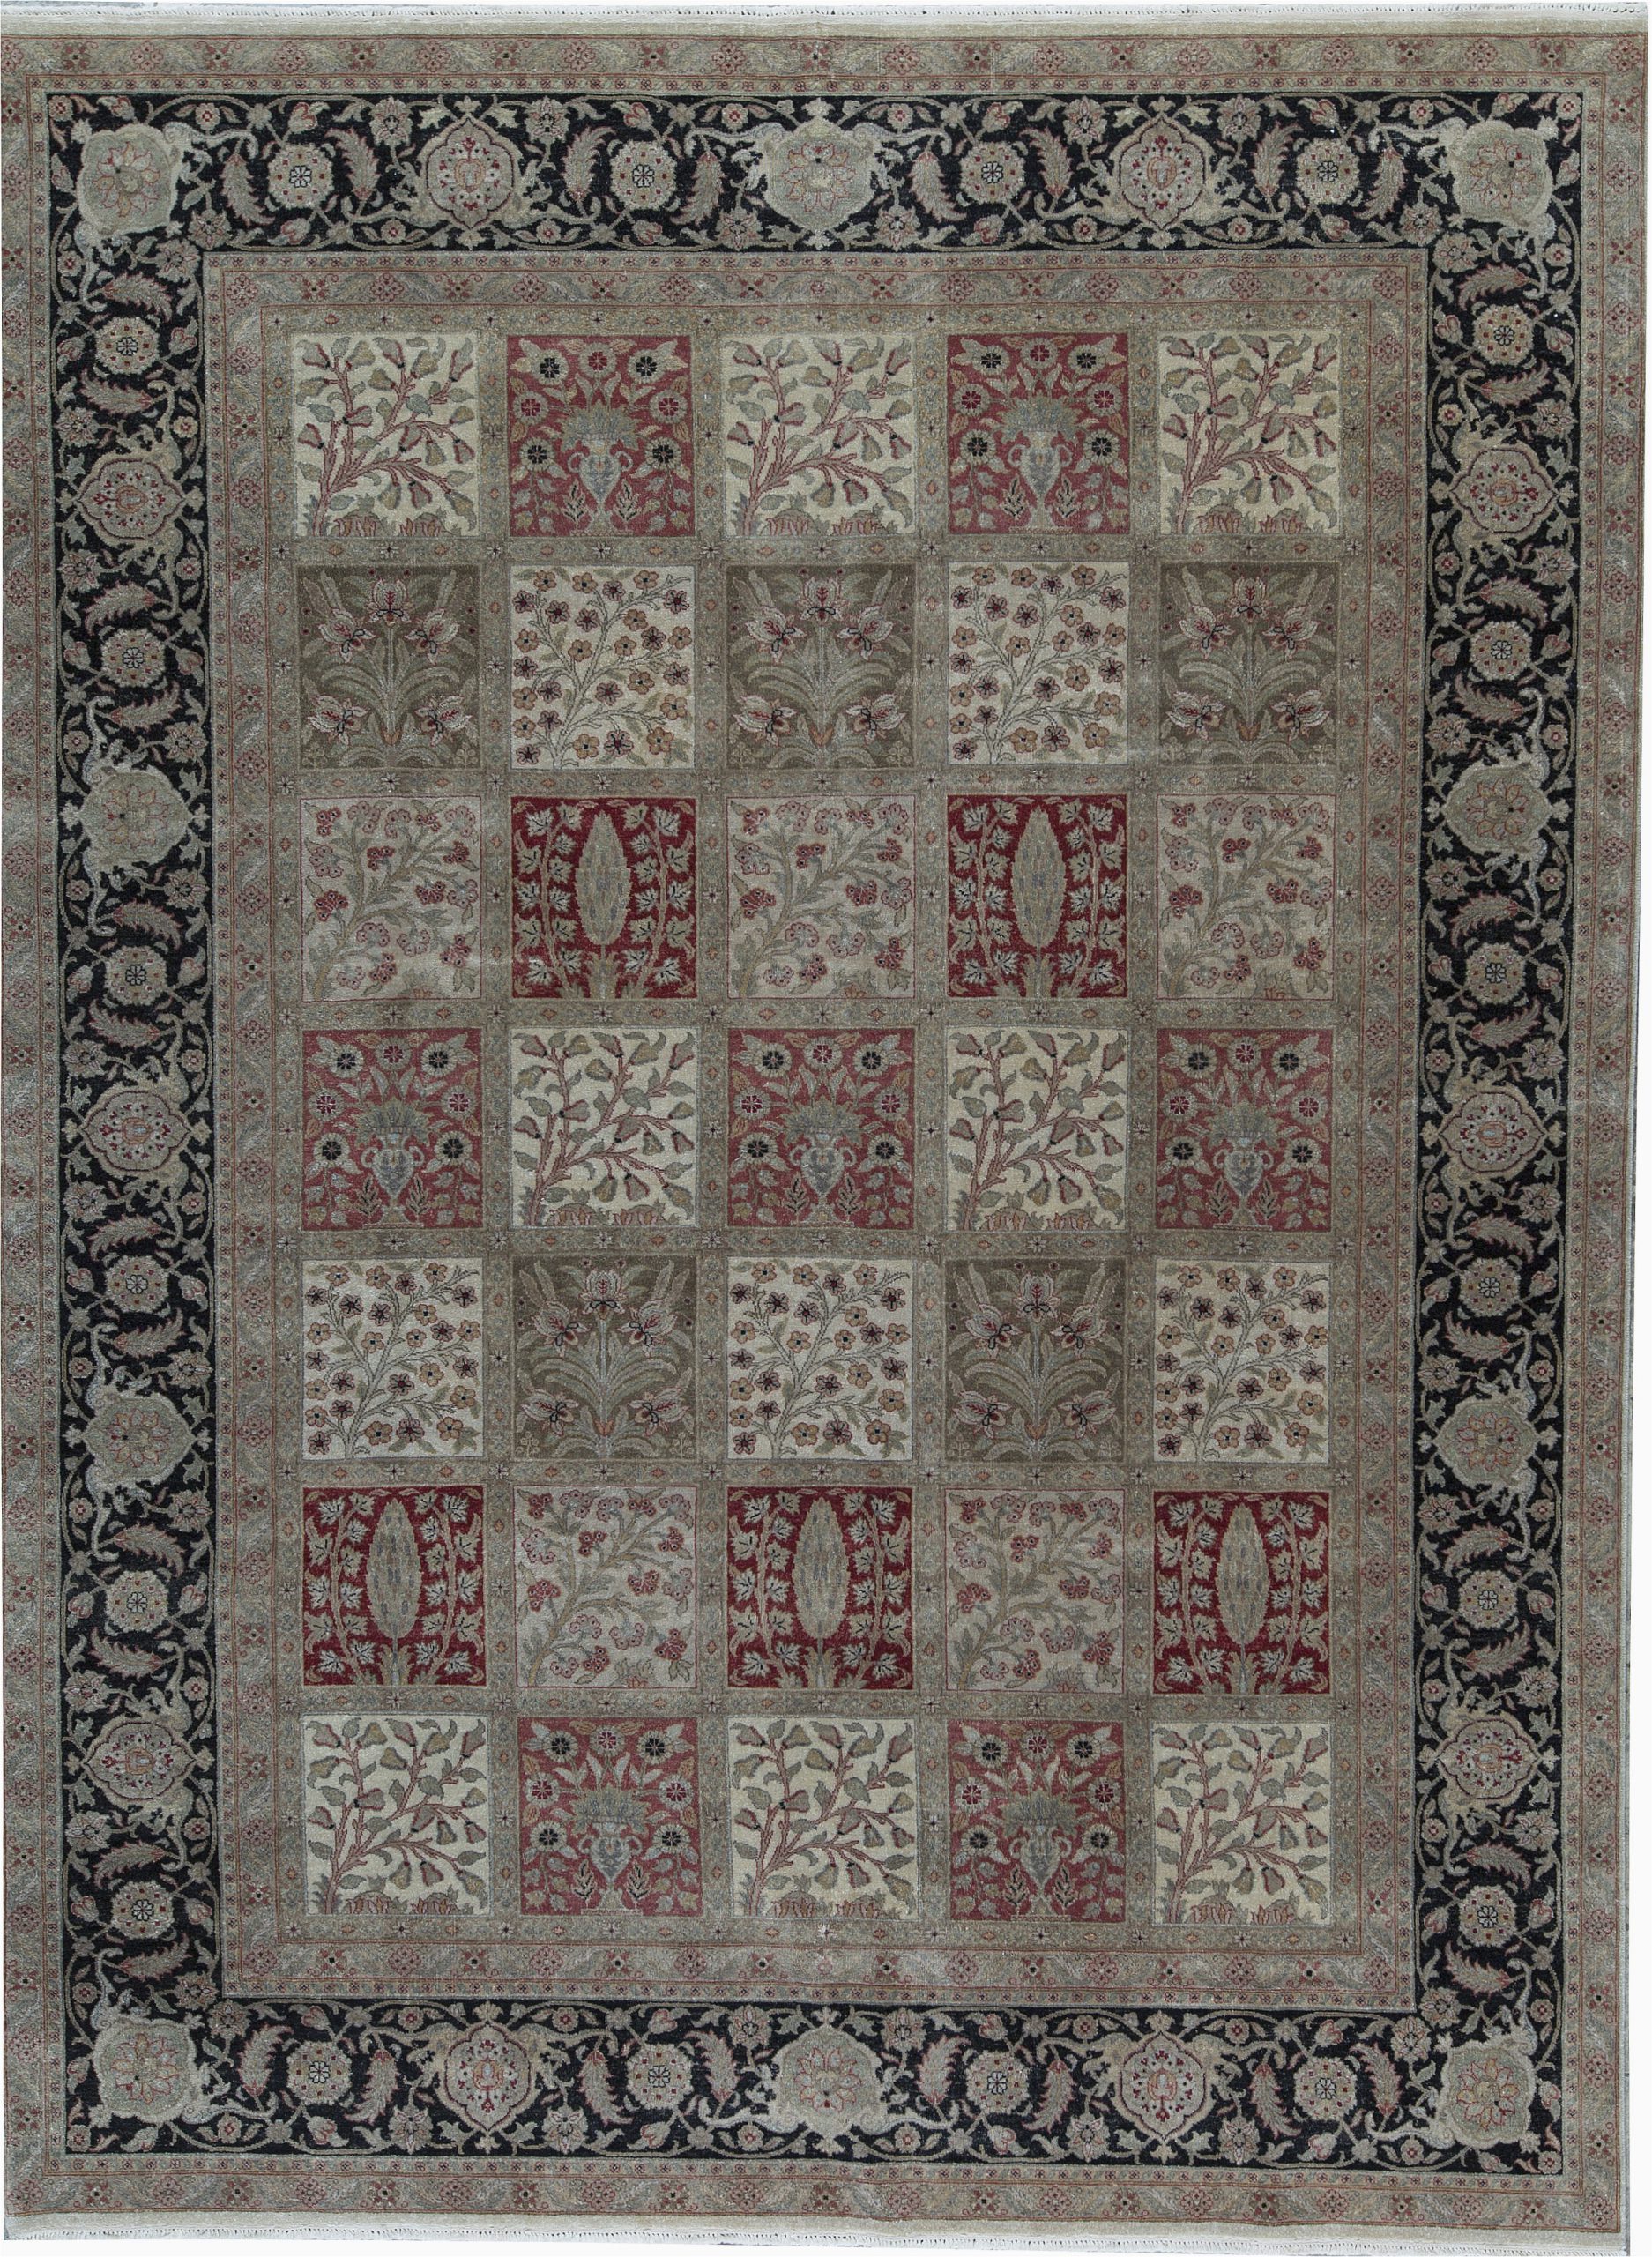 12 X 13 area Rug E Of A Kind Mountain King Hand Knotted Brown 10 X 13 7" Wool area Rug